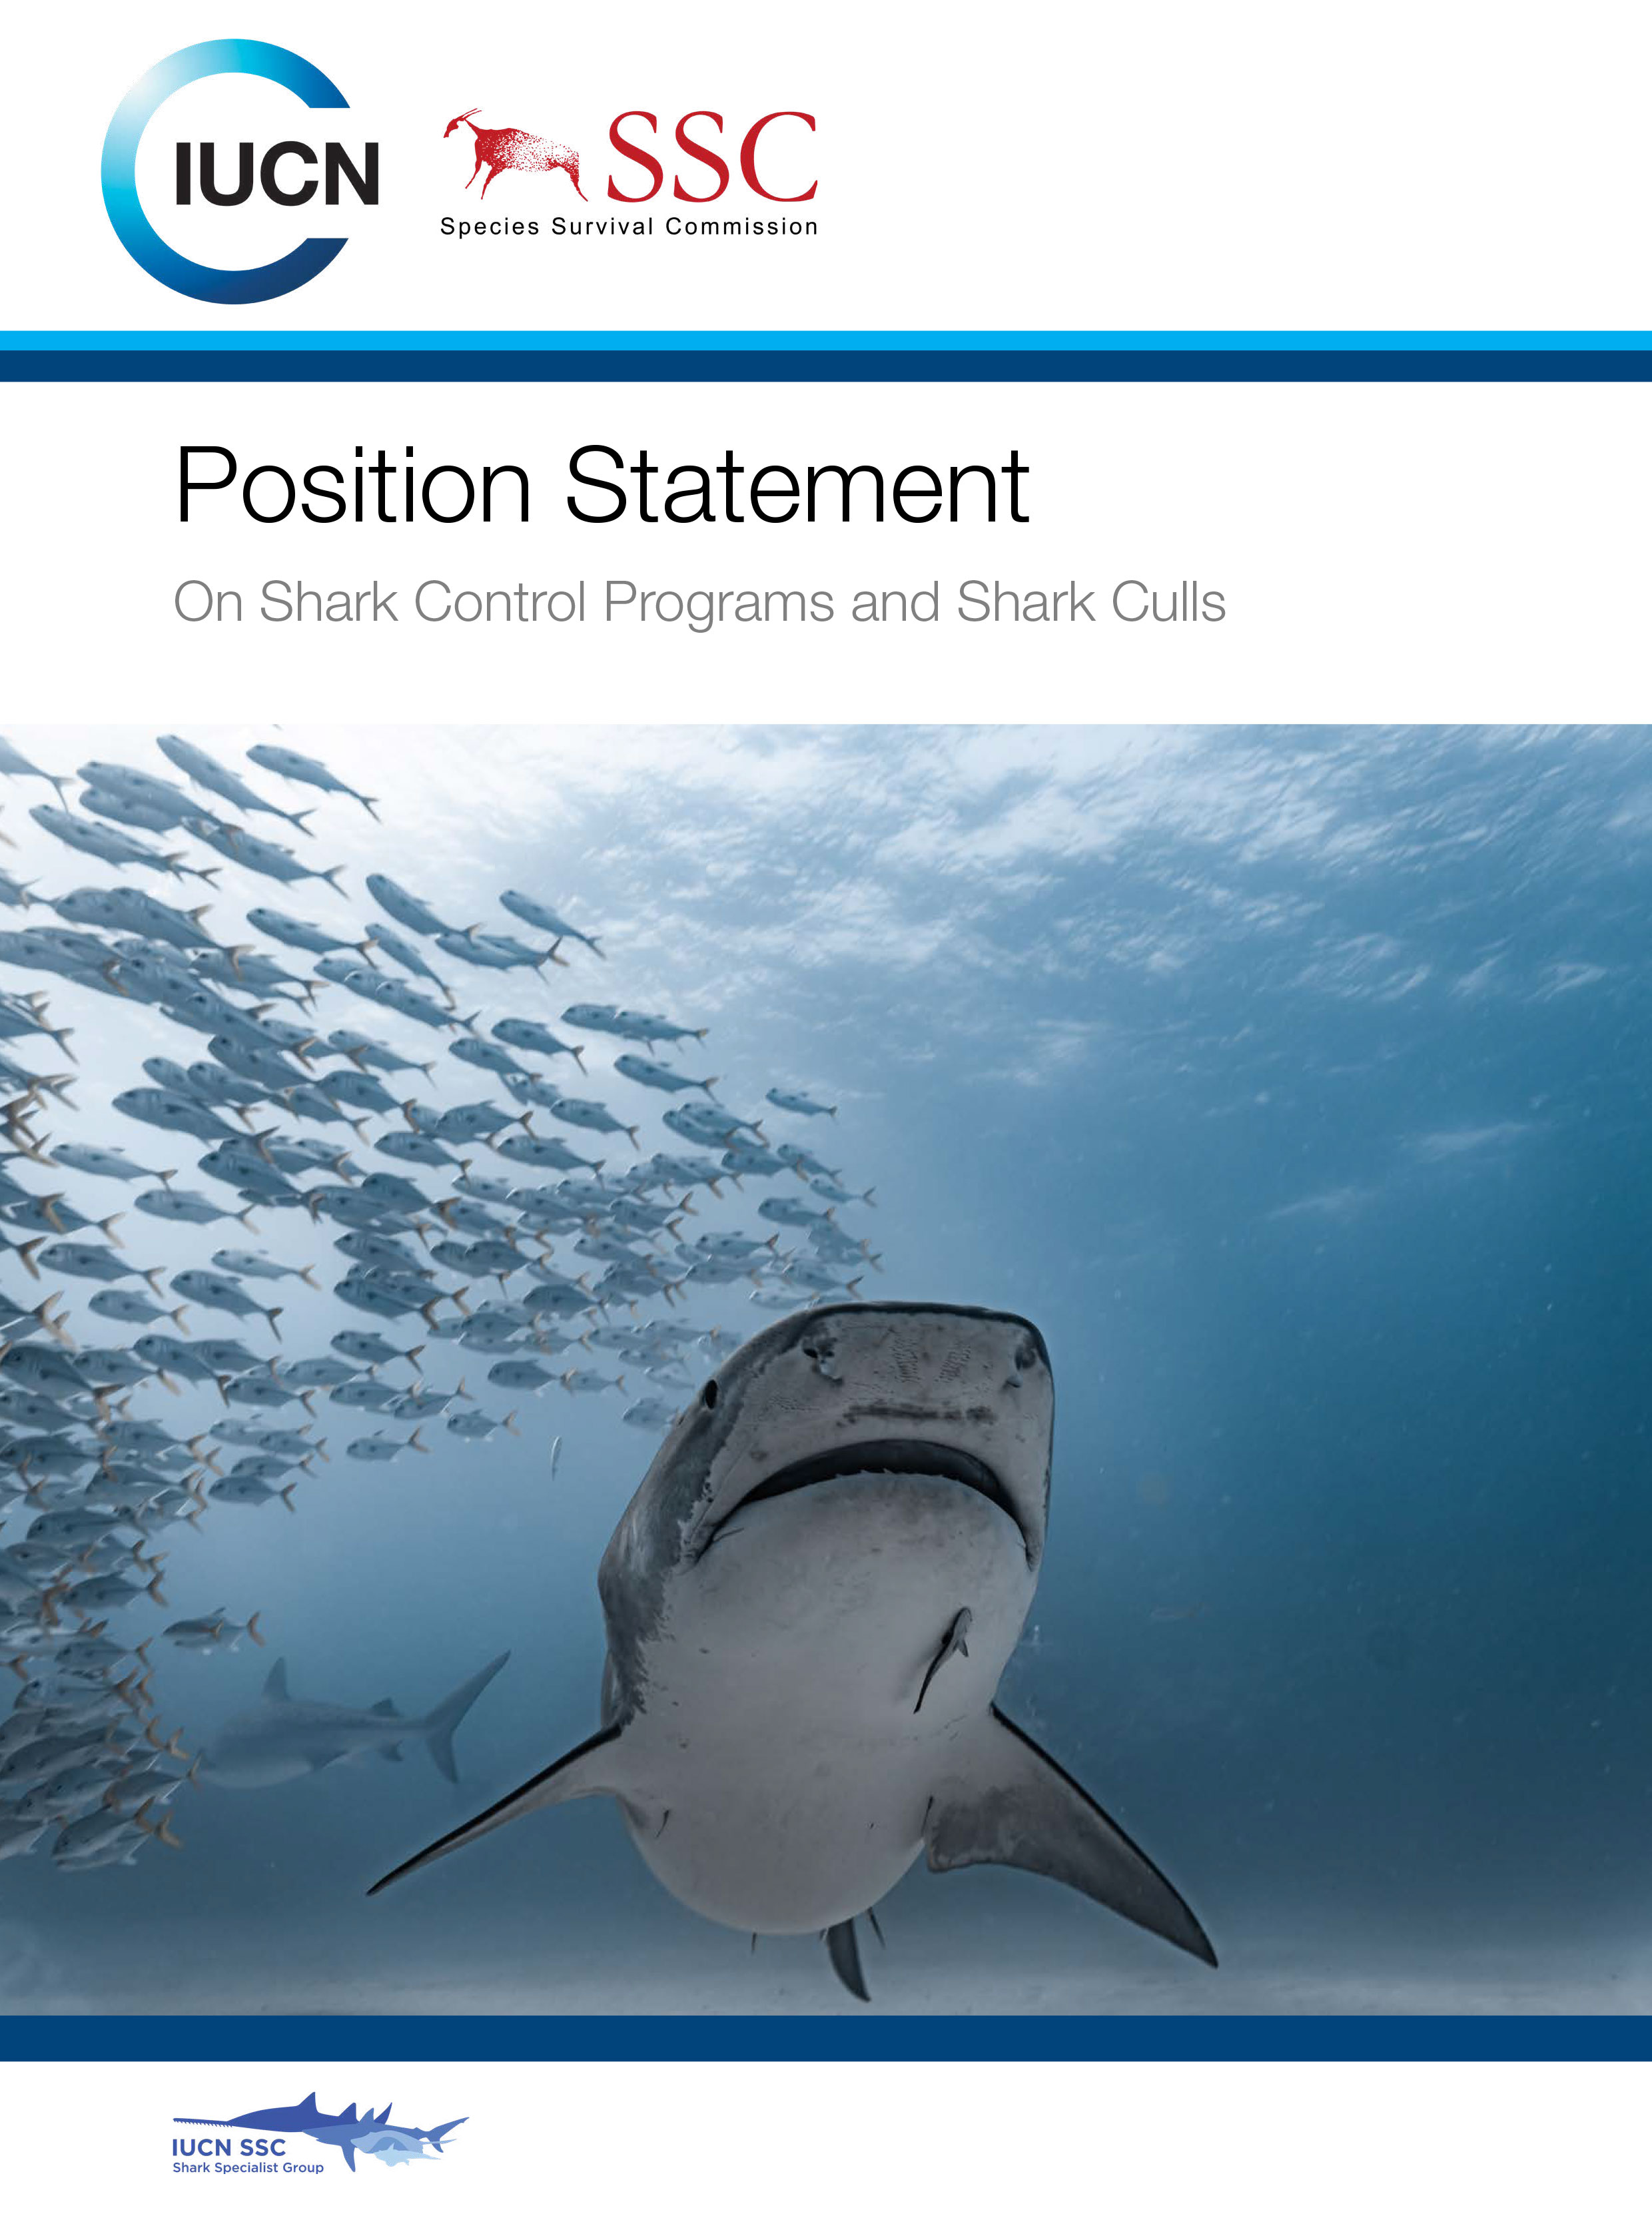 Cover Position Statement on shark control programs and shark culls